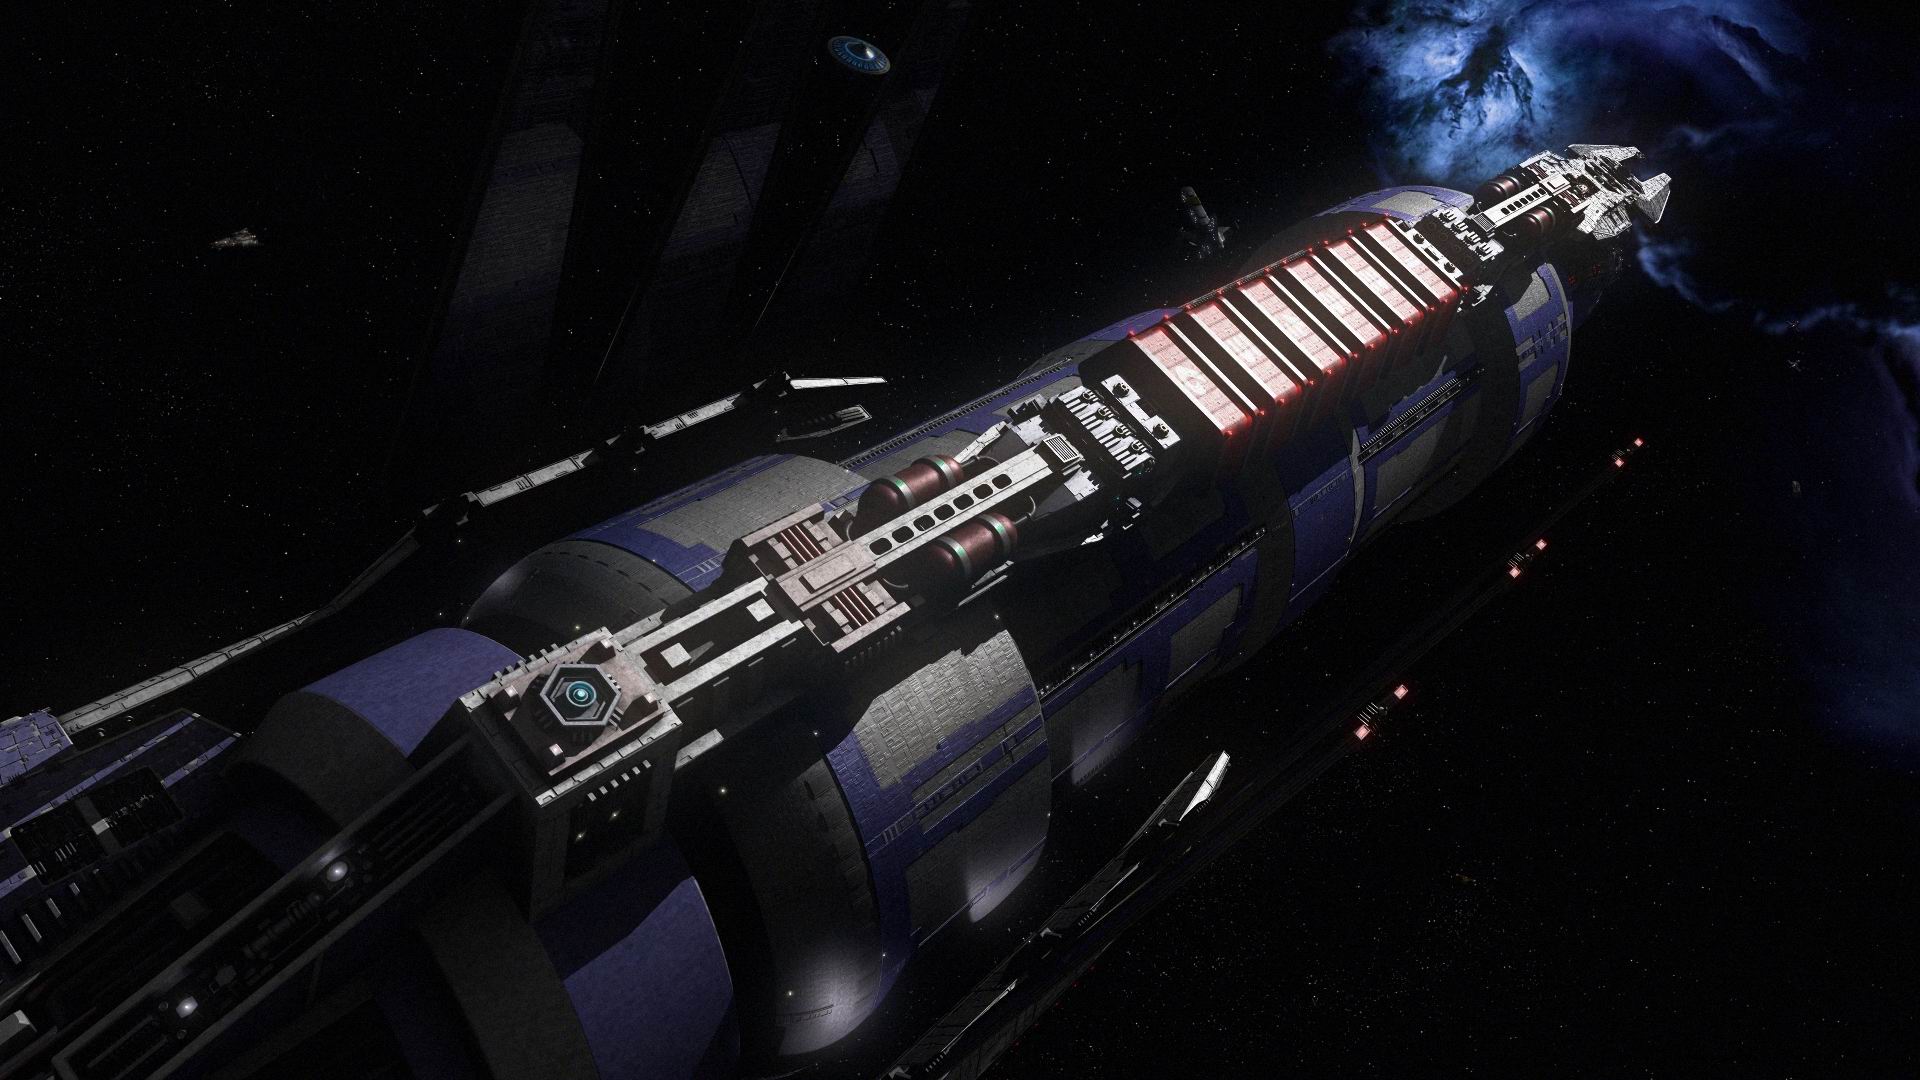 TV Show Babylon 5: The Lost Tales HD Wallpaper | Background Image